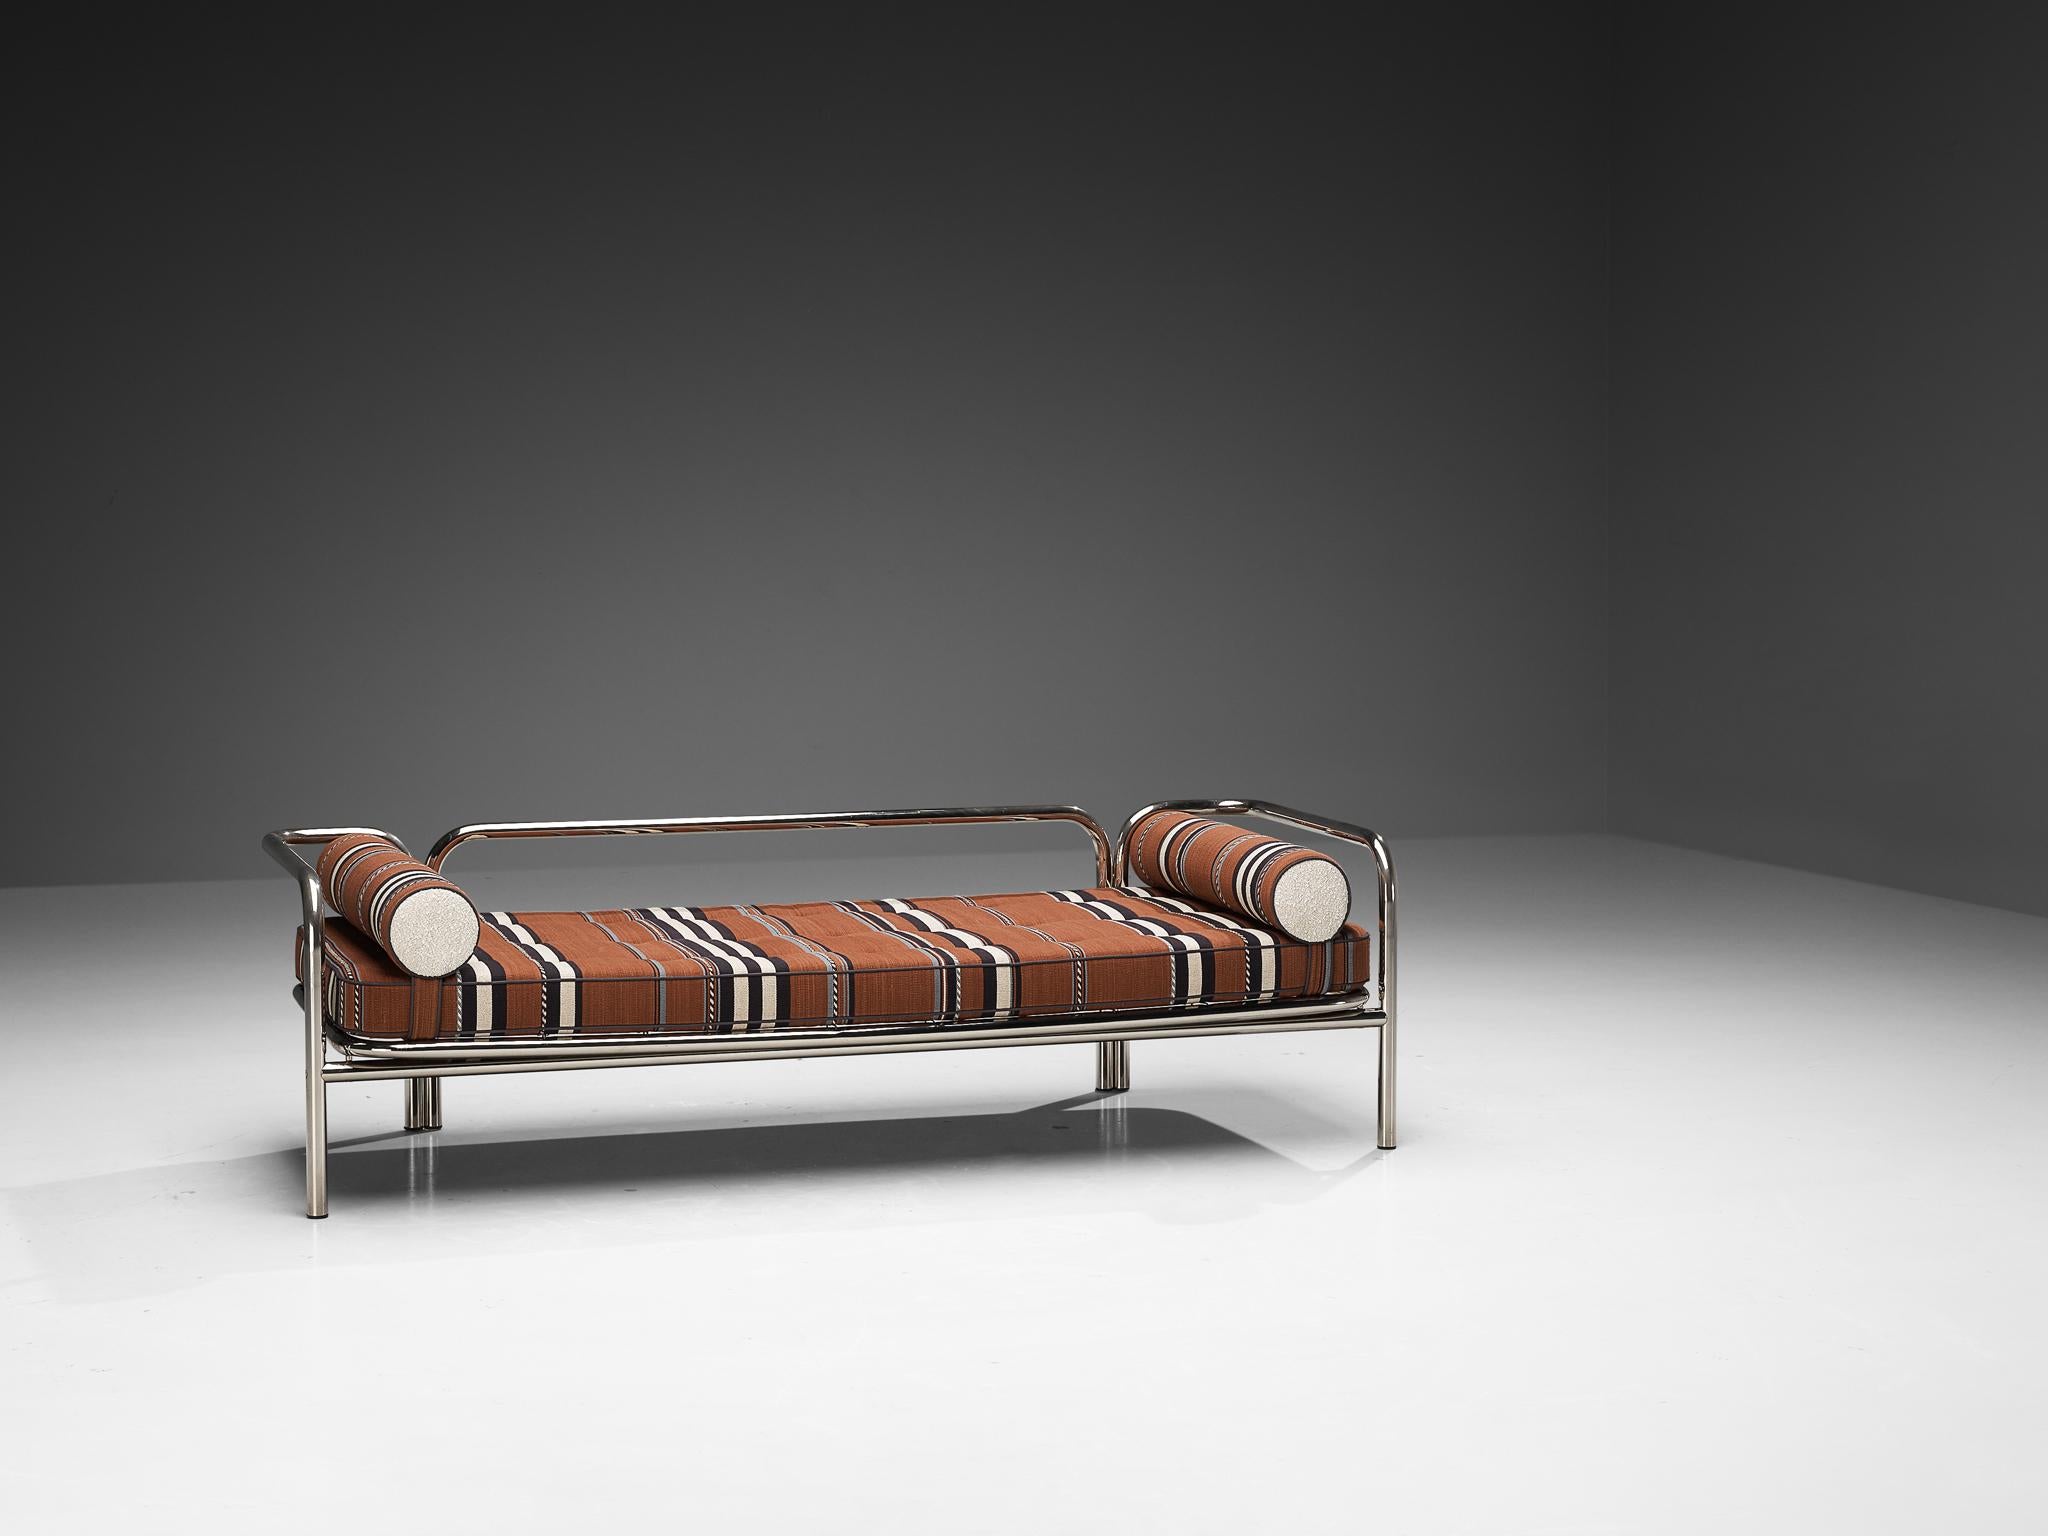 Gae Aulenti for Poltronova 'Locus Solus' Daybed in Chrome-Plated Steel  For Sale 2